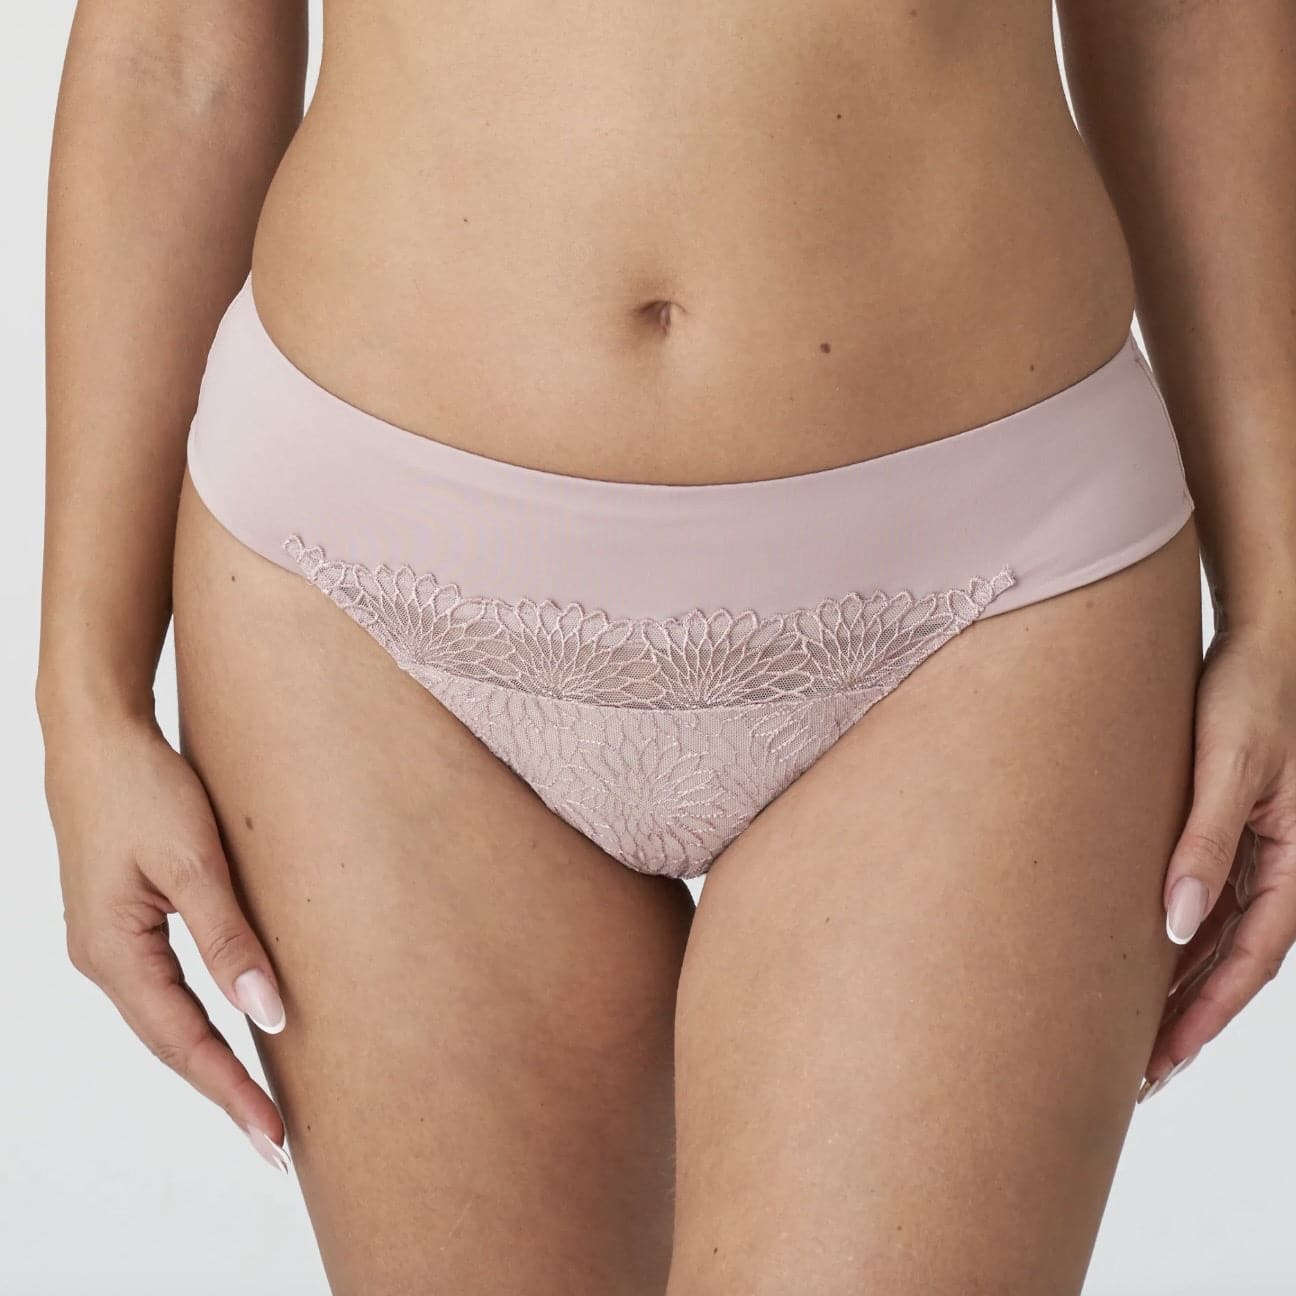 Prima Donna Sophora Thong in Bois de Rose 0563181-Panties-Prima Donna-Bois de Rose-Small-Anna Bella Fine Lingerie, Reveal Your Most Gorgeous Self!